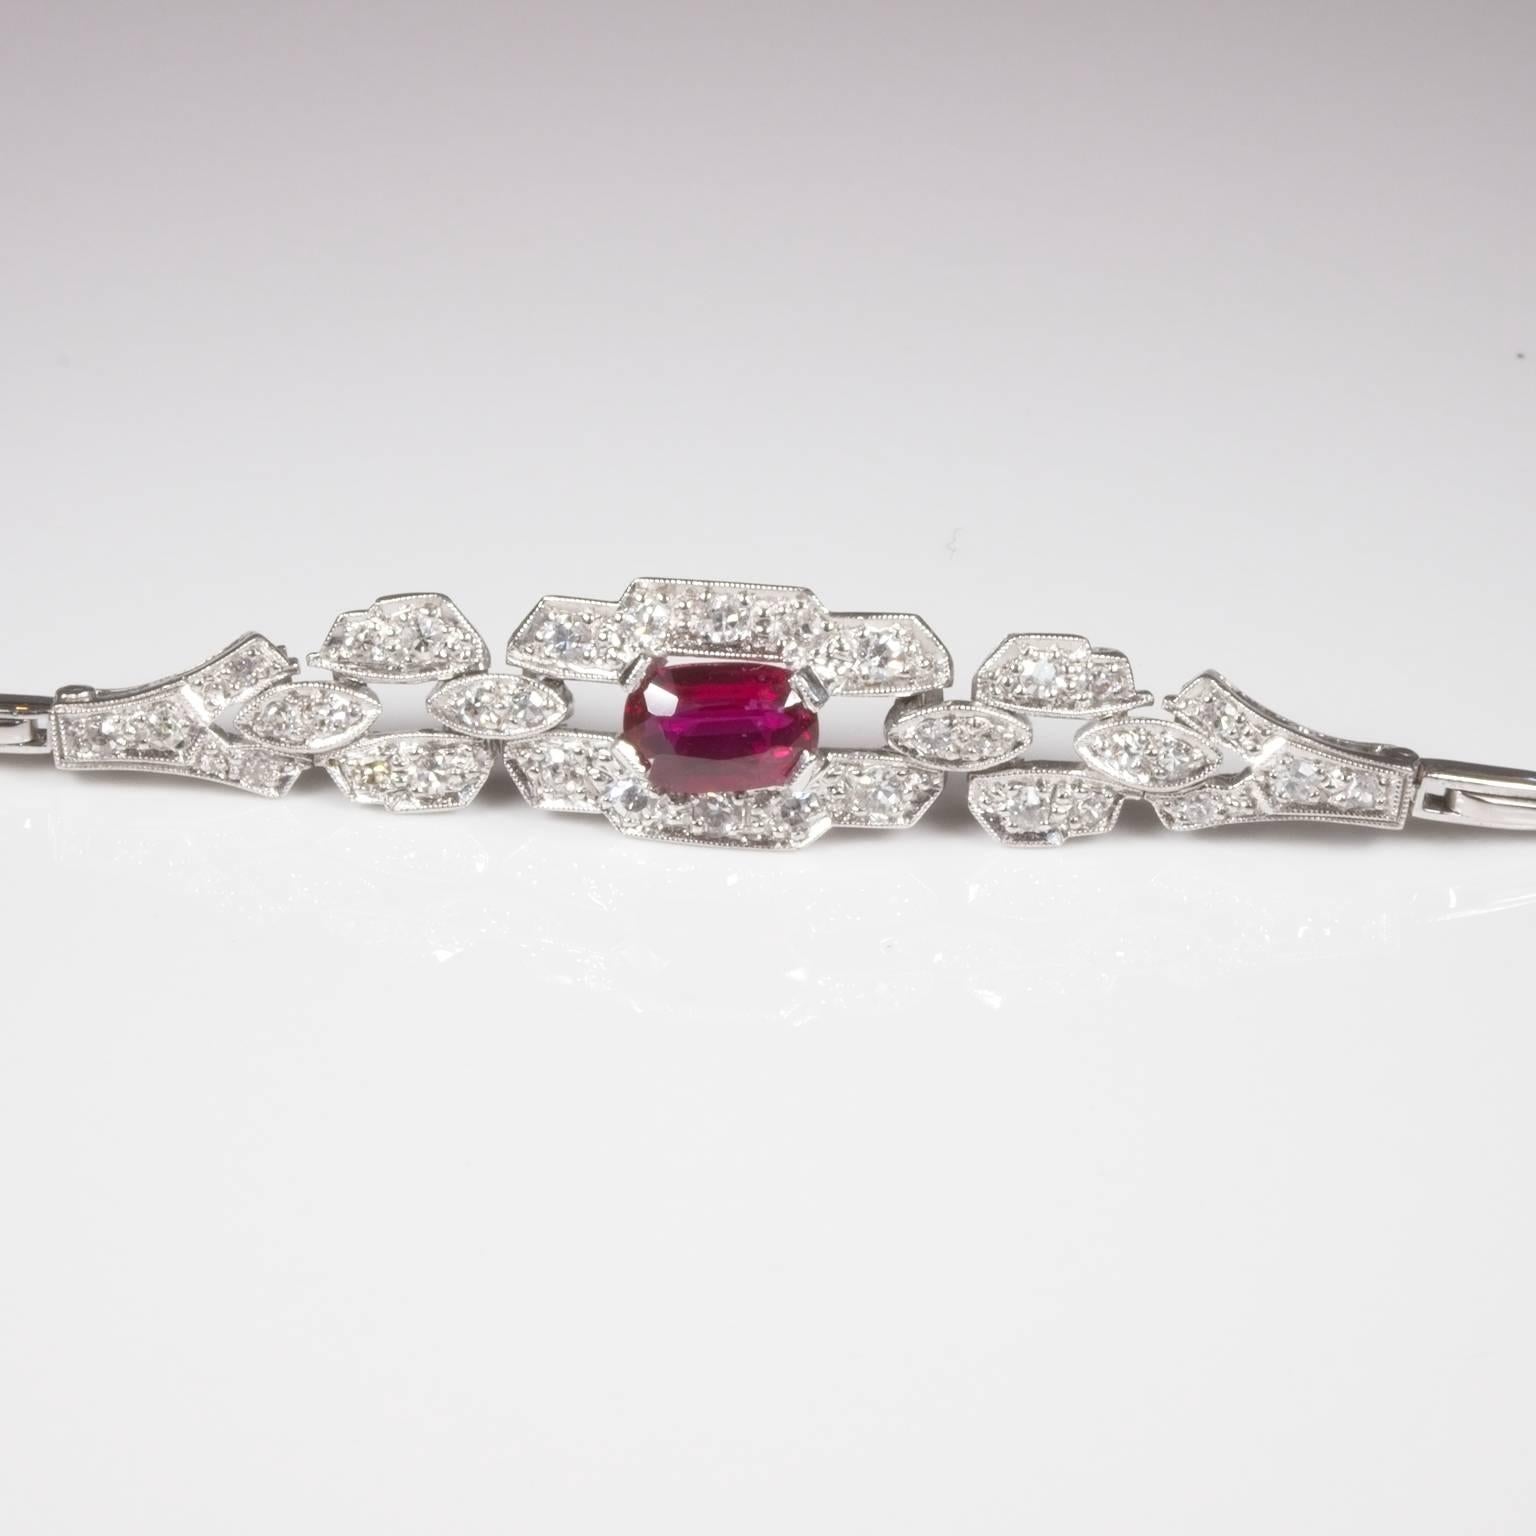 Stunning 18ct white gold ruby and diamond bracelet set with a dark purplish red oval facetted centre ruby surrounded by 34 single cut diamonds I-J/VS-SI on an articulated flexible bar link band with figure of eight safety catch and box clasp.  17cm